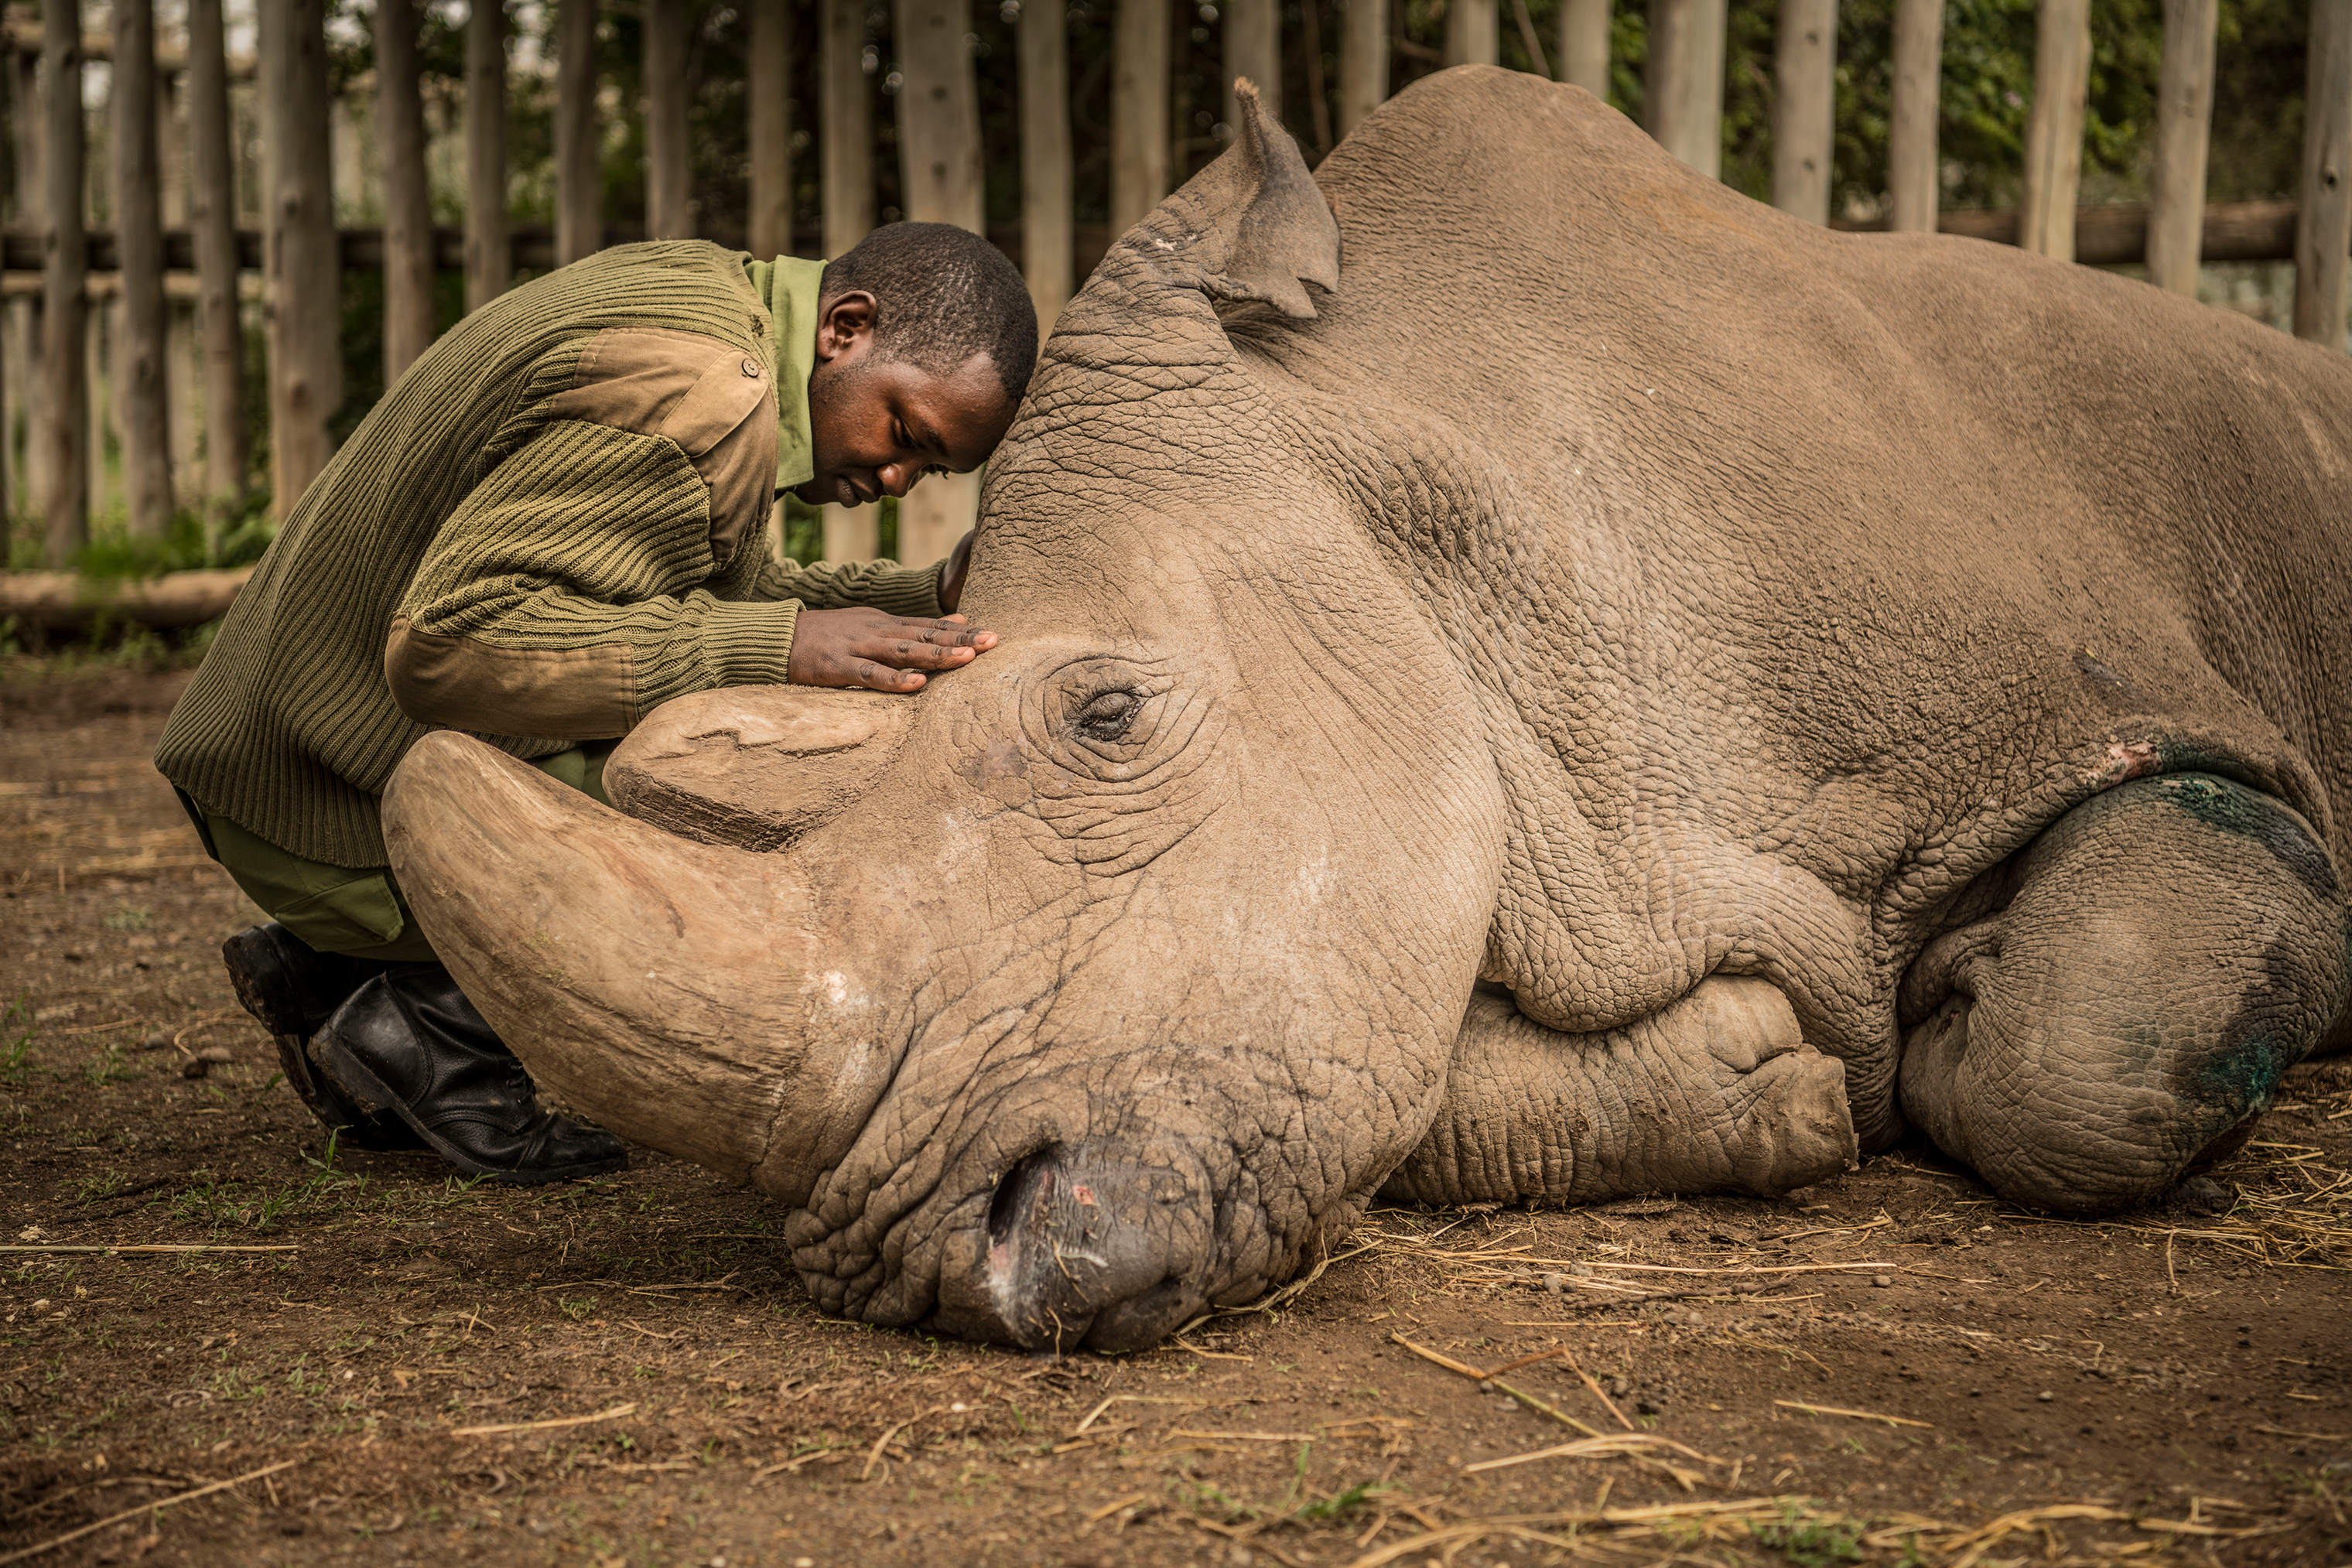 Joseph Wachira, 26, comforts Sudan, the last male Northern White Rhino on the planet, moments before he passed away in March. (Ami Vitale—National Geographic Creative)